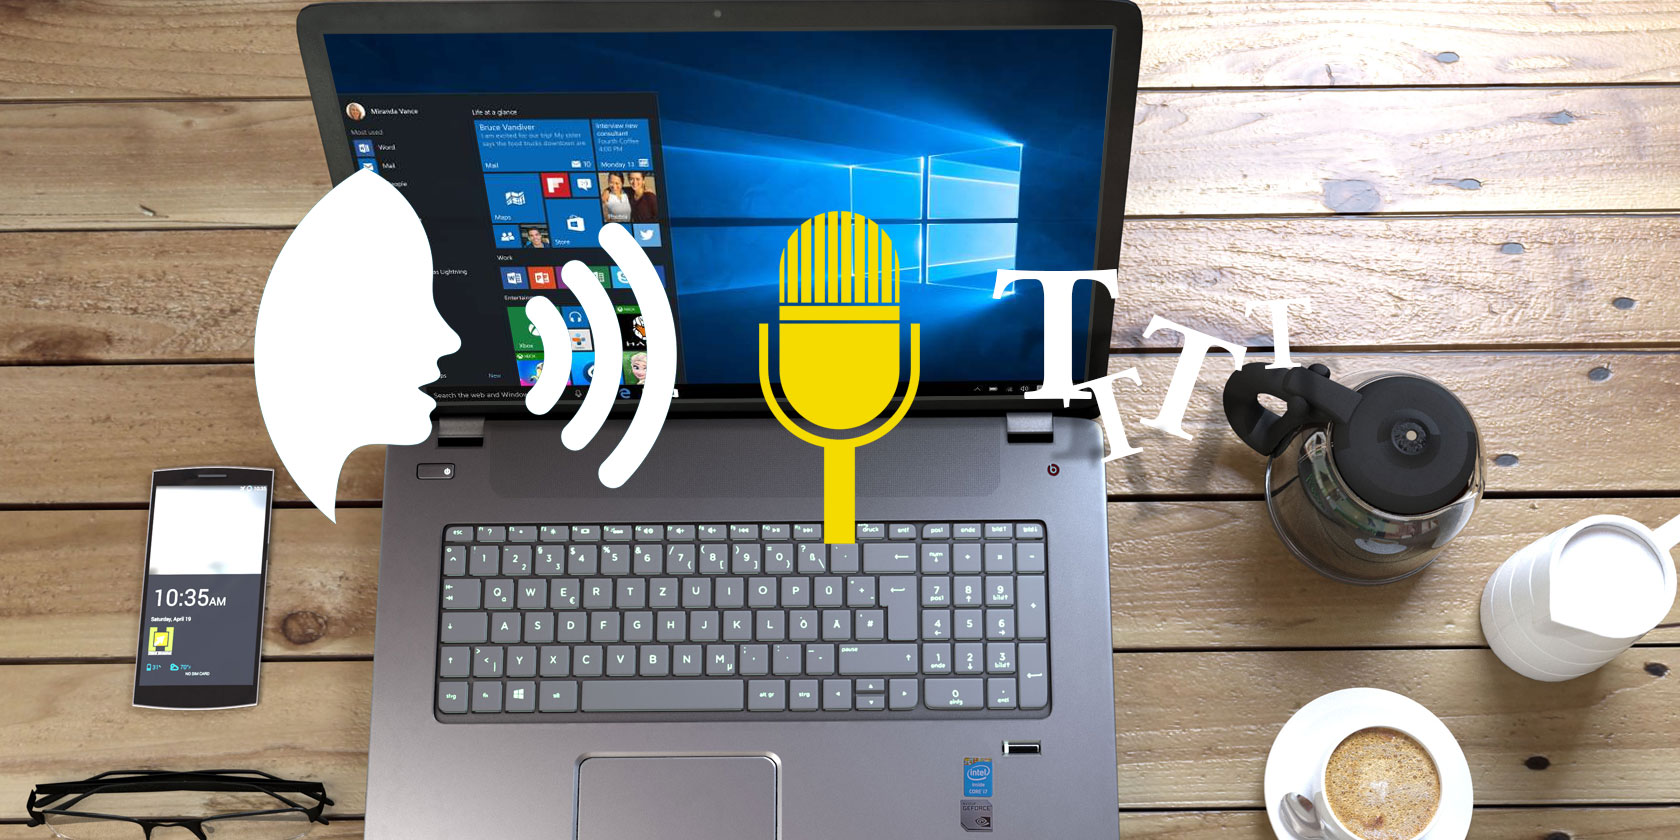 text to speech voices for windows 10